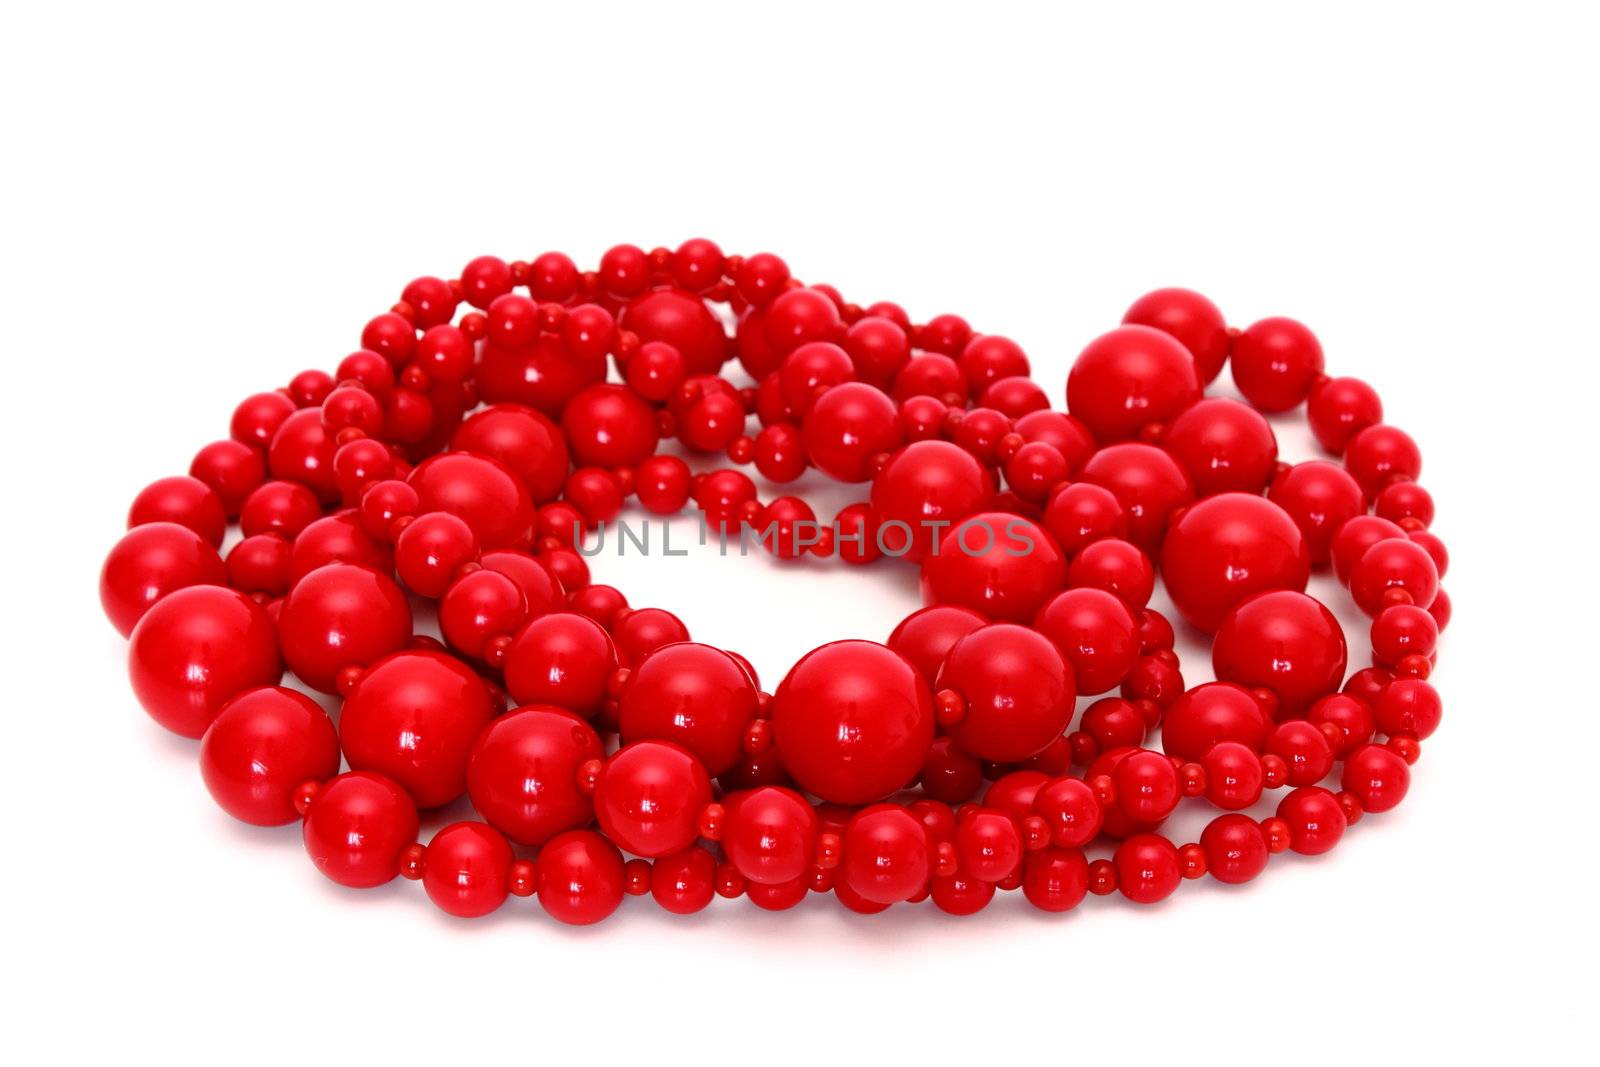 red beads by taviphoto